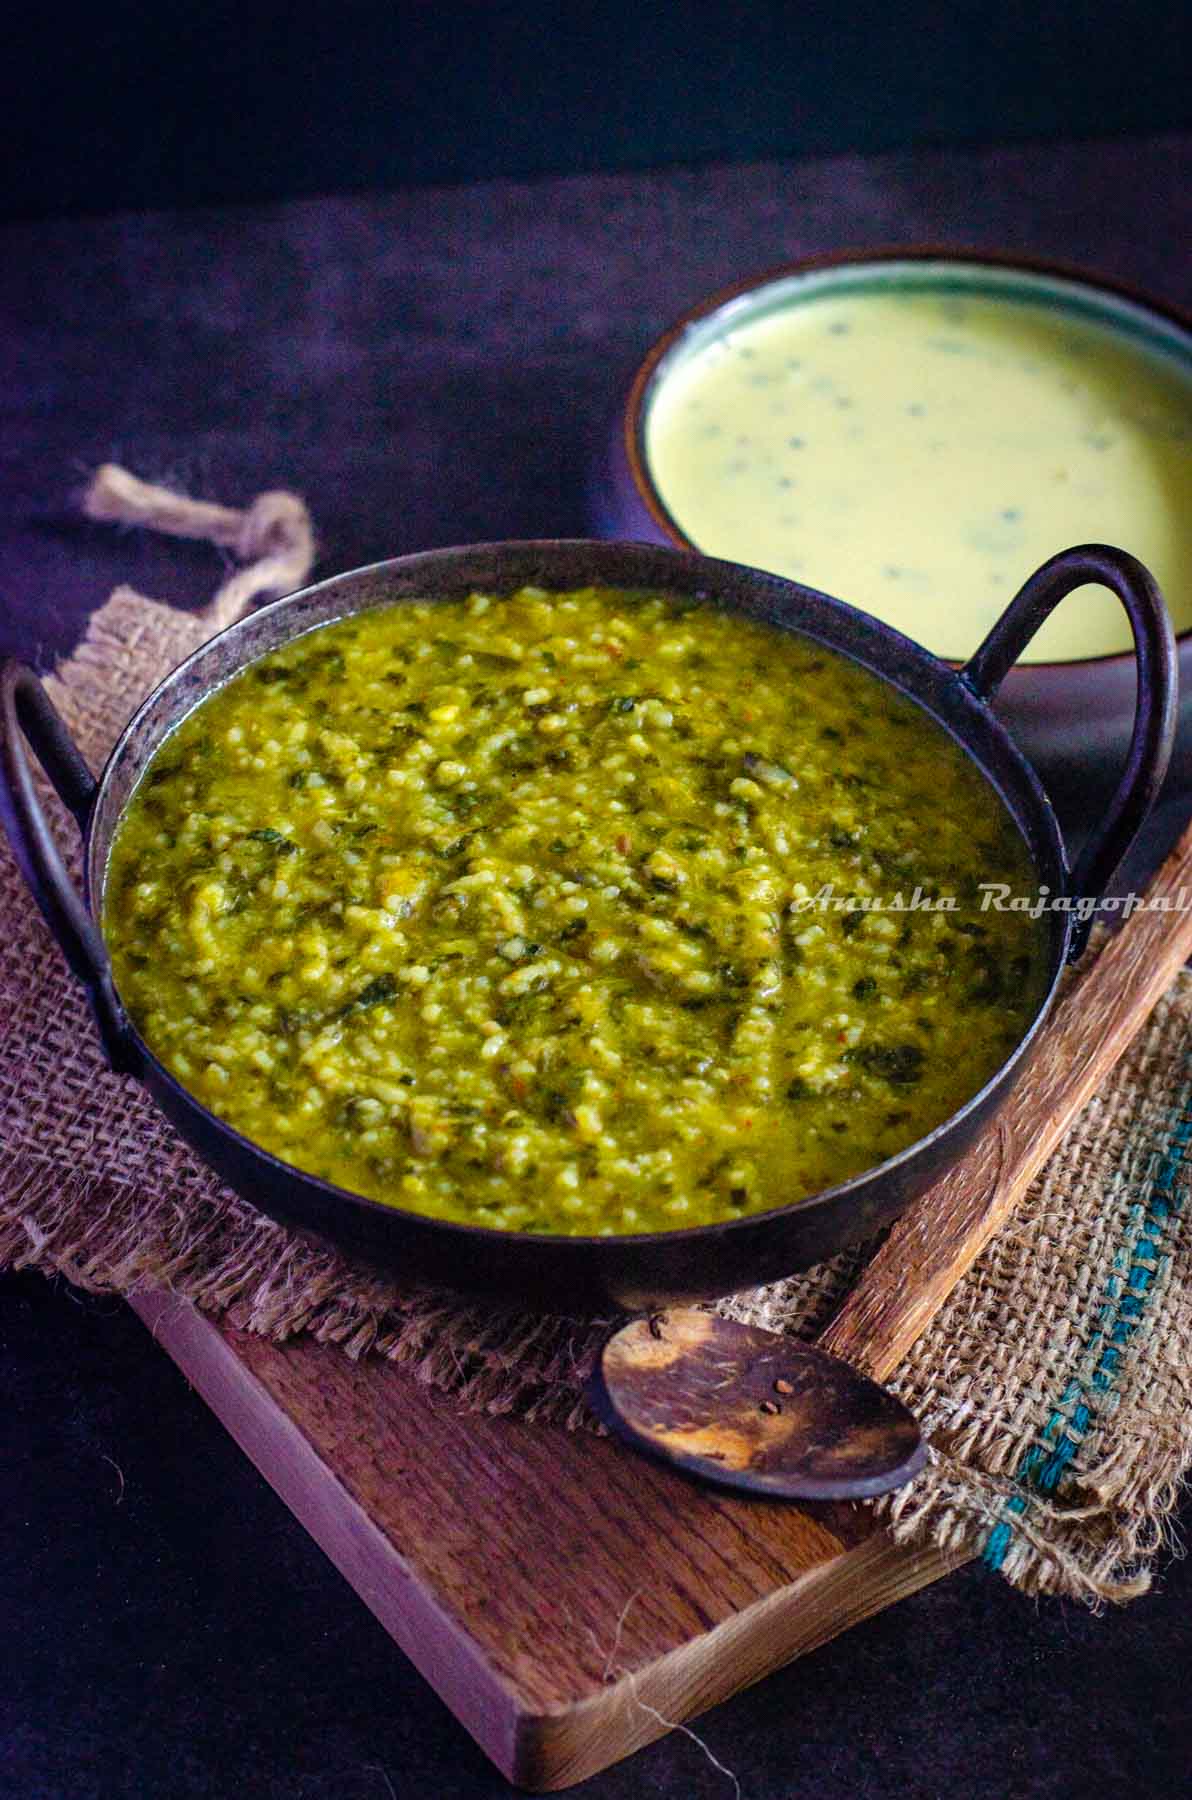 creamy palak khichdi served in an iron wok placed over a burlap mat on a wooden chopping board. Gujarati Kadhi served as an accompaniment. Wooden spoon by the side of the wok.